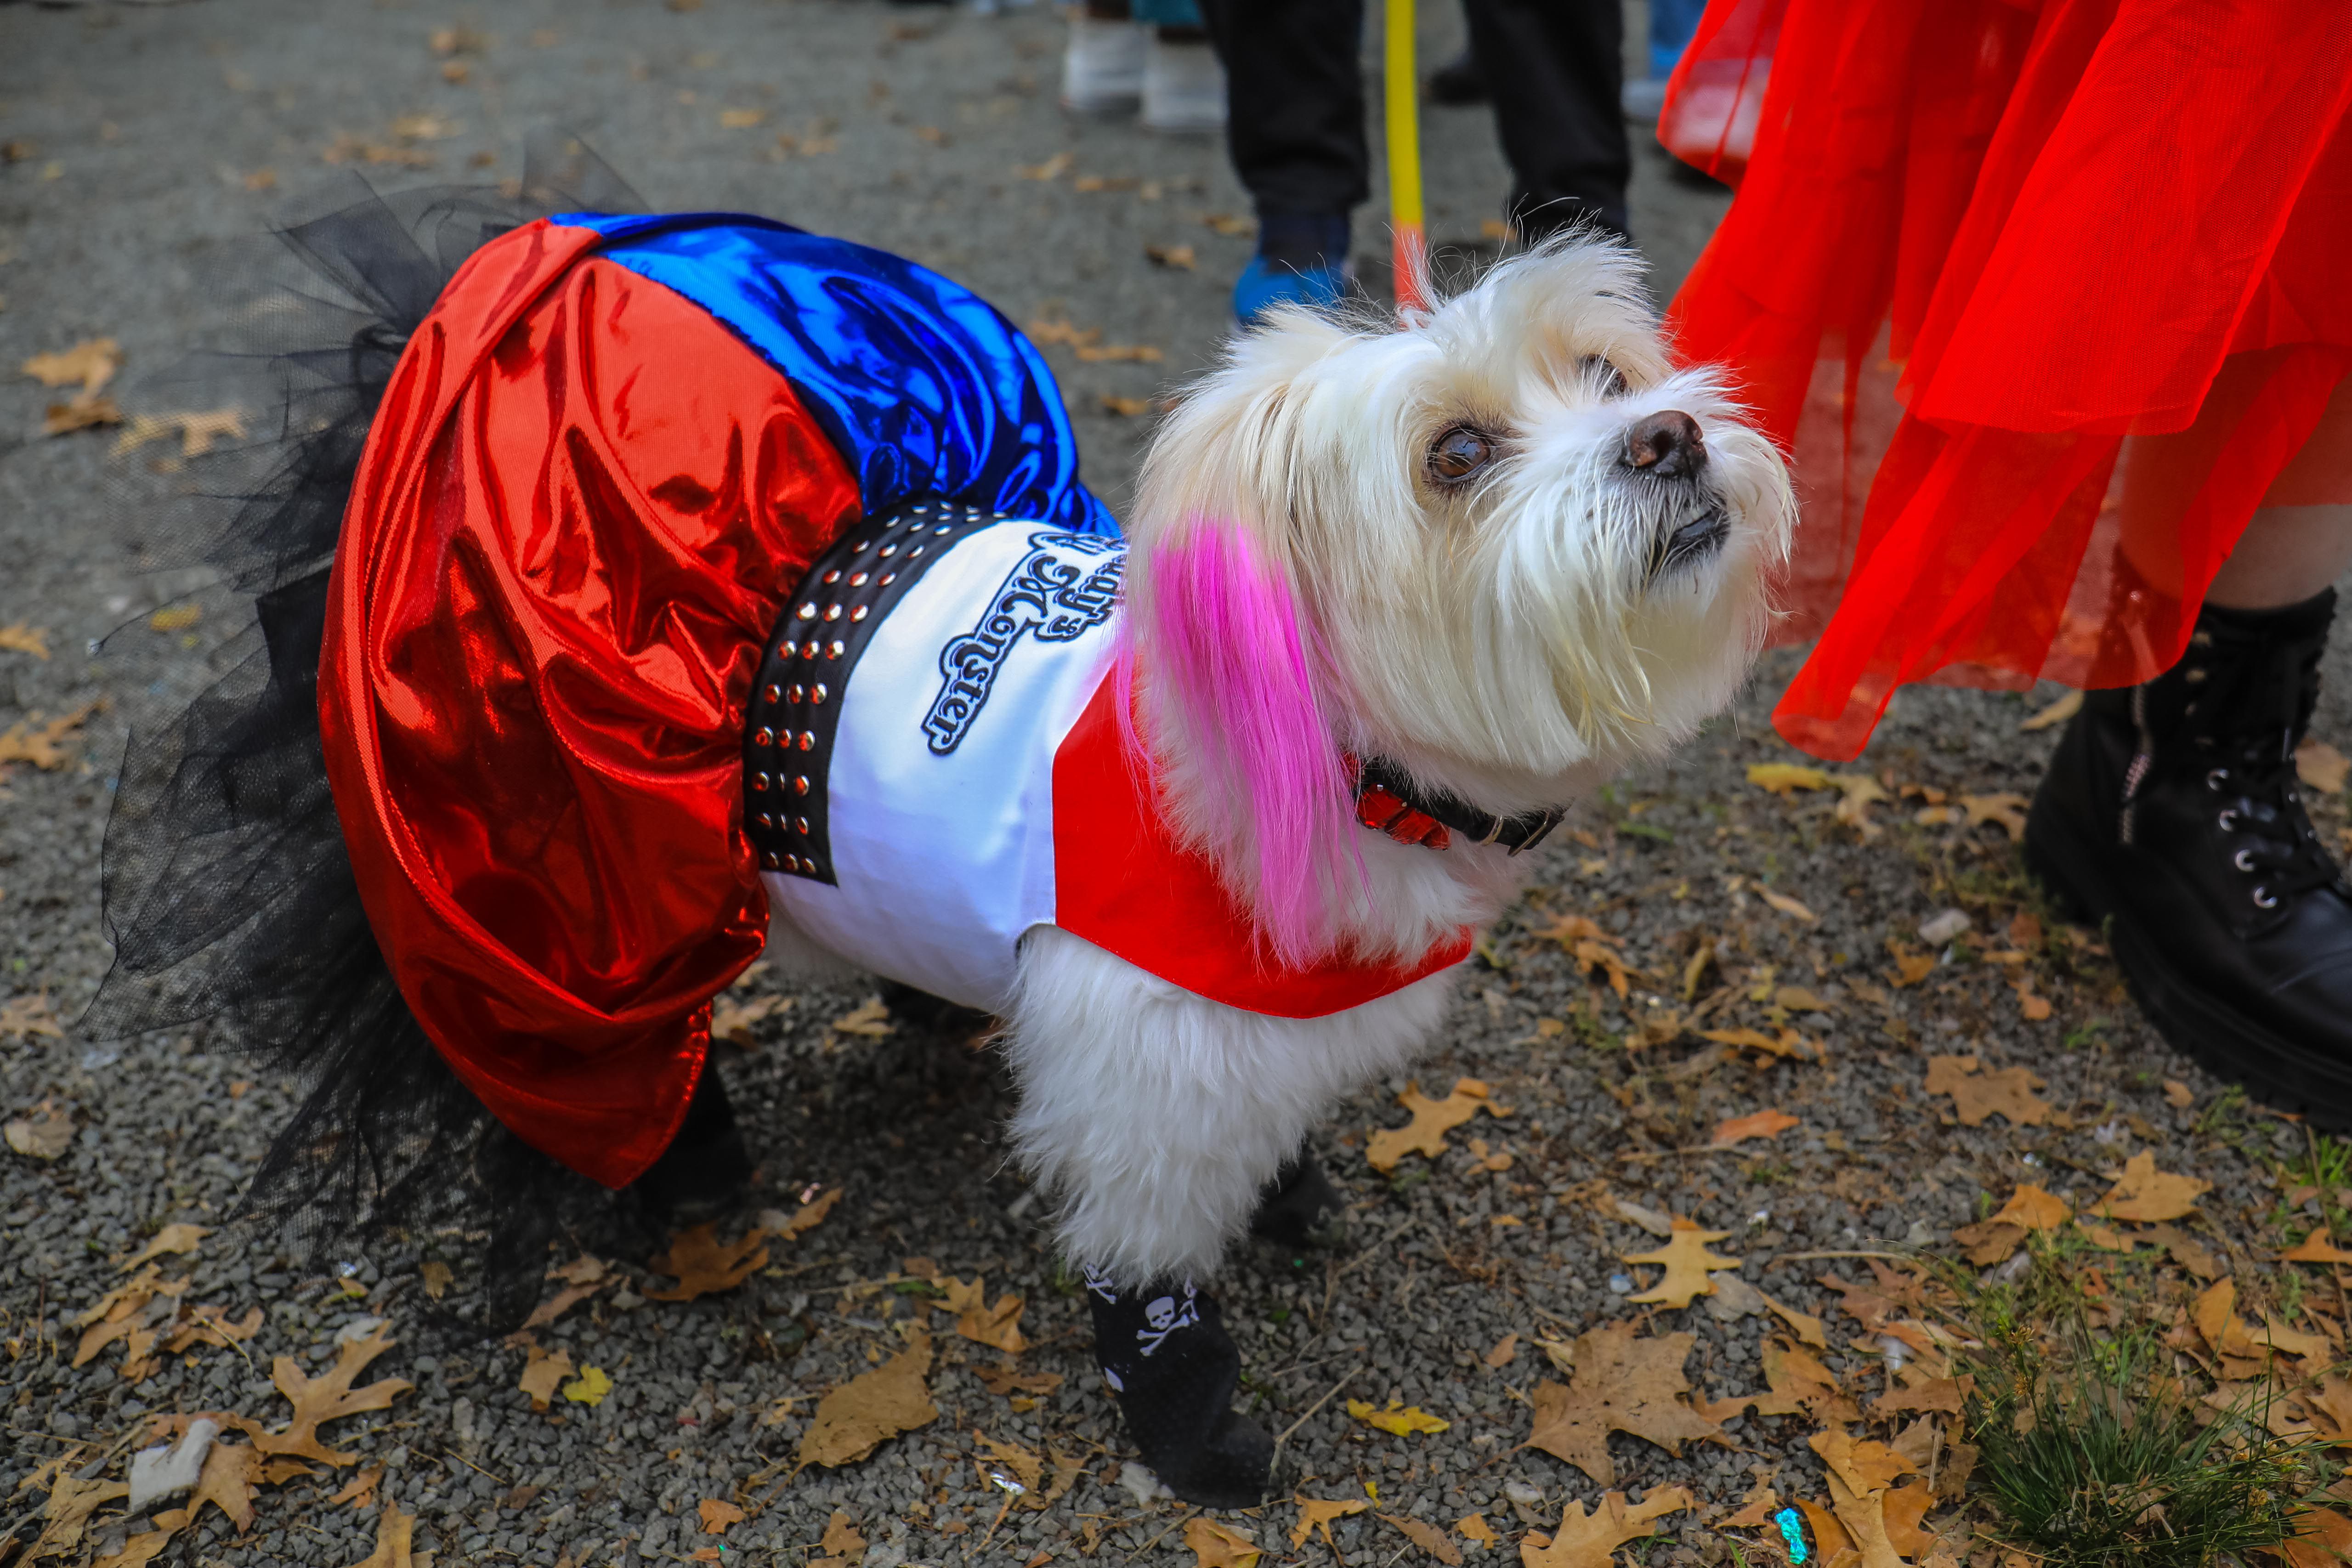 Dogs in costume at the Tompkins Square Park Halloween Parade